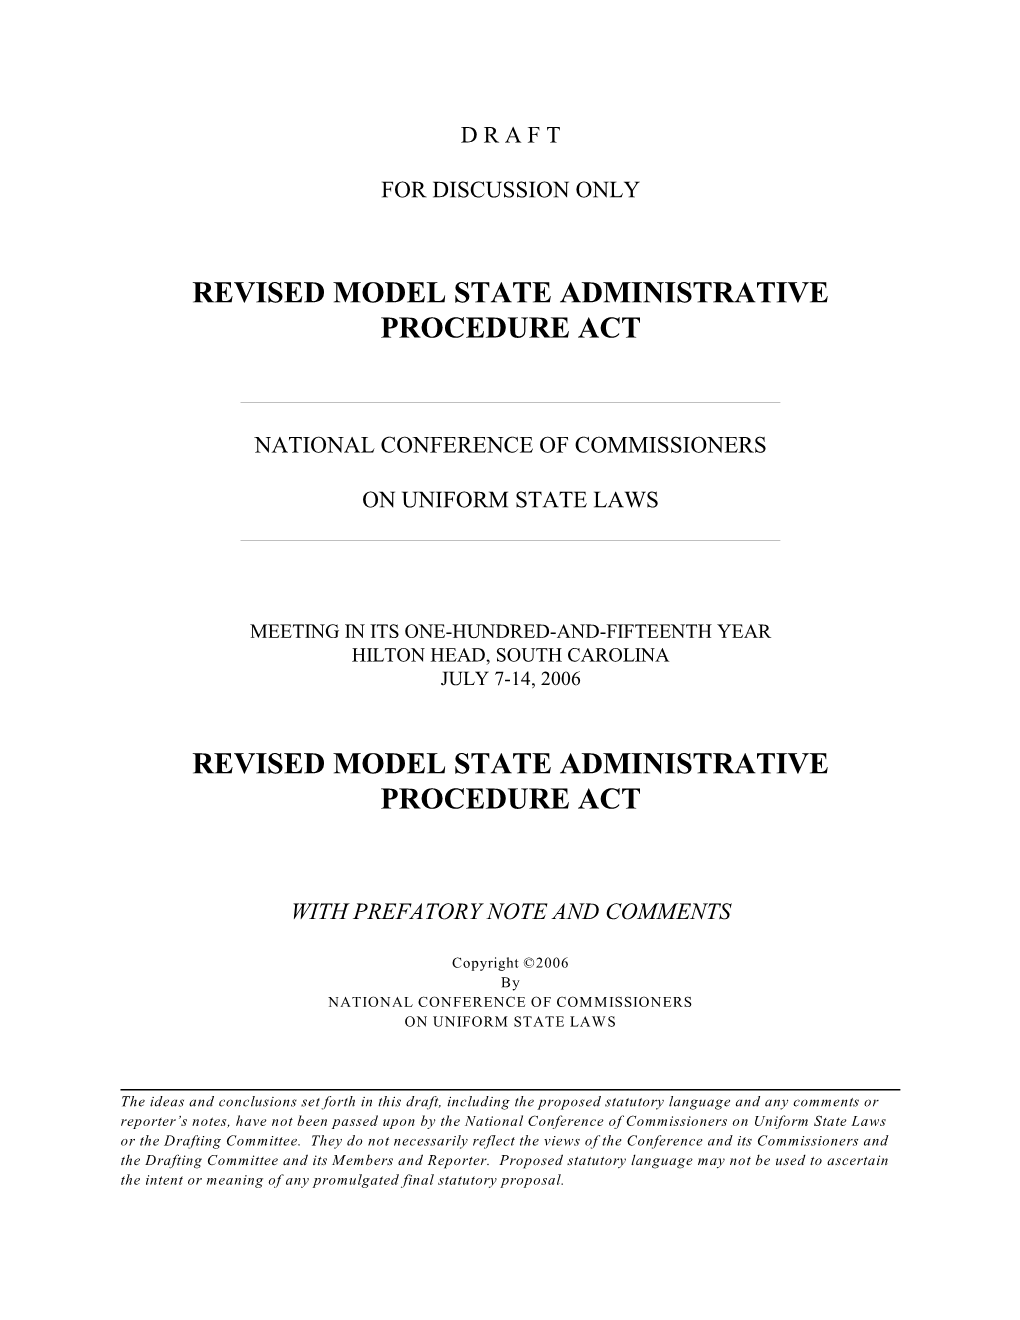 Revised Model State Administrative Procedure Act Revised Model State Administrative Procedure